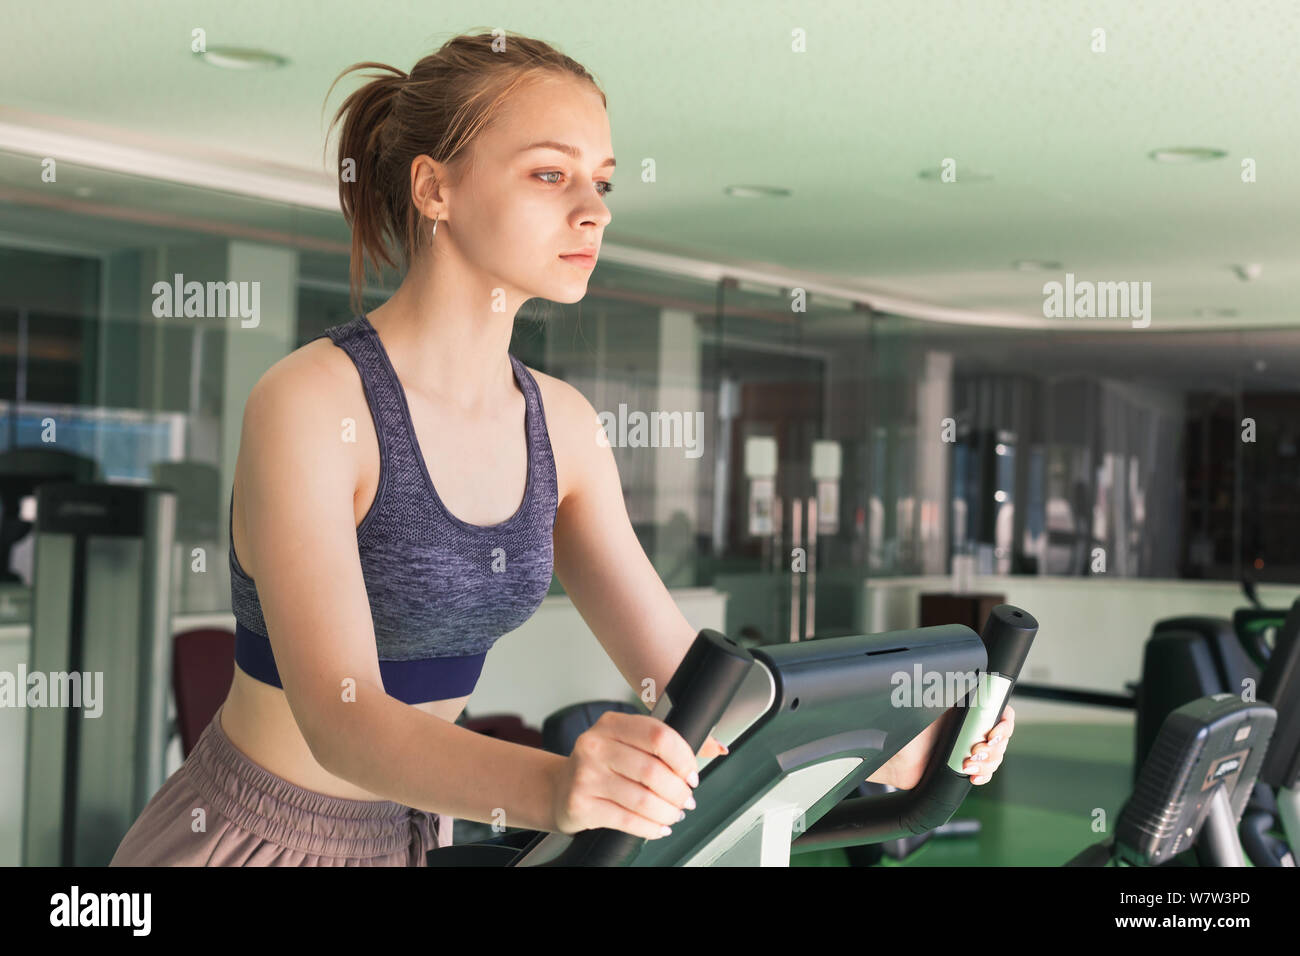 Young blond sporty girl is engaged on a stationary bike in a gym Stock Photo